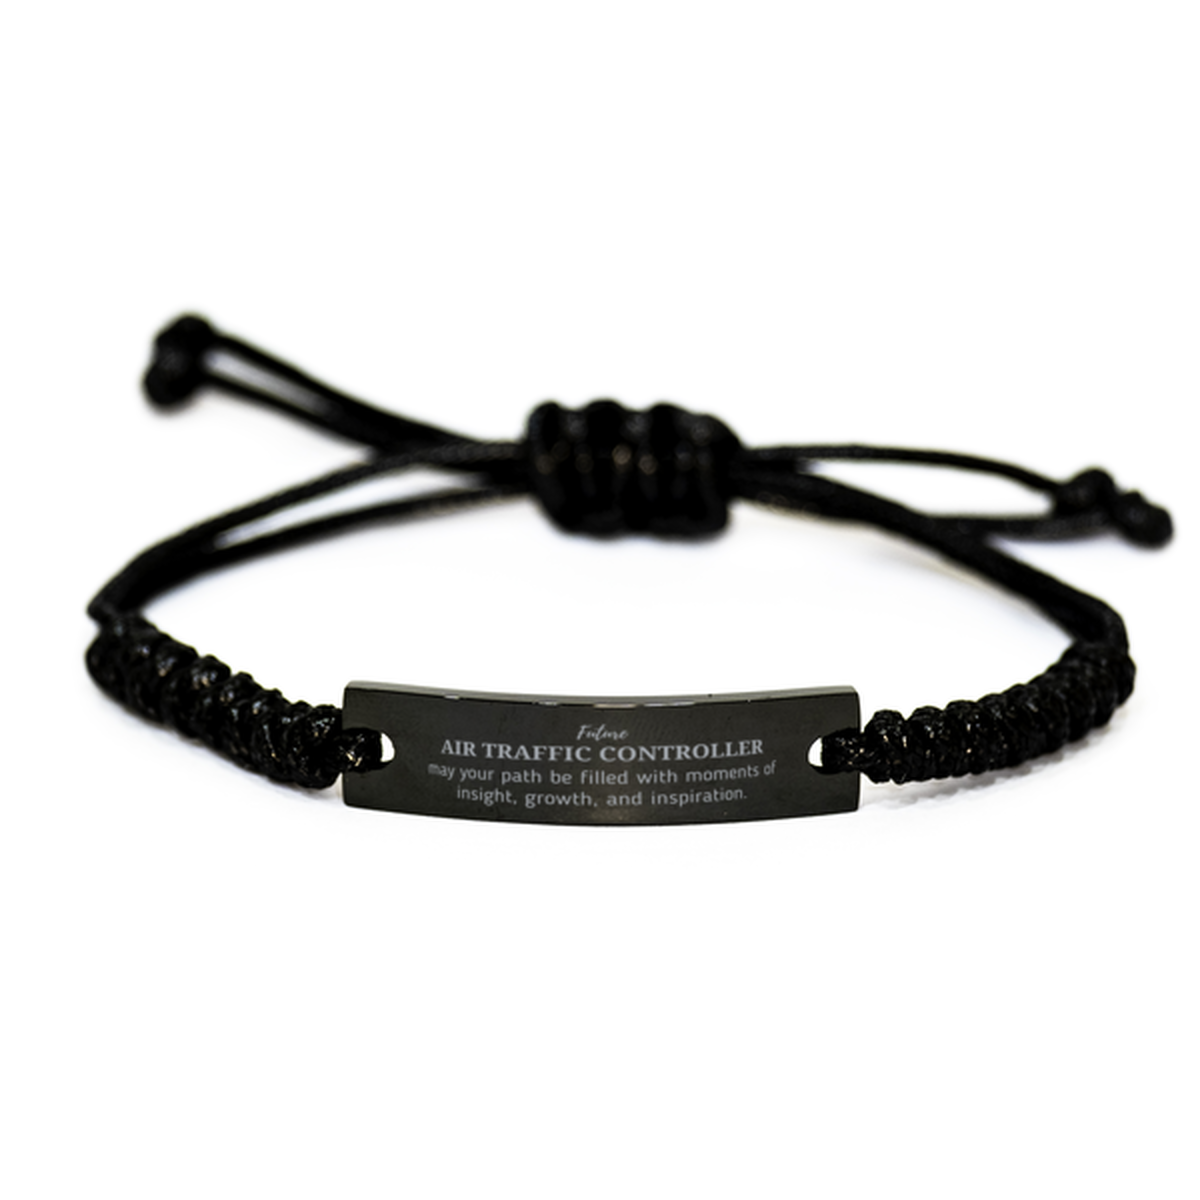 Future Air Traffic Controller Gifts, May your path be filled with moments of insight, Graduation Gifts for New Air Traffic Controller, Christmas Unique Black Rope Bracelet For Men, Women, Friends